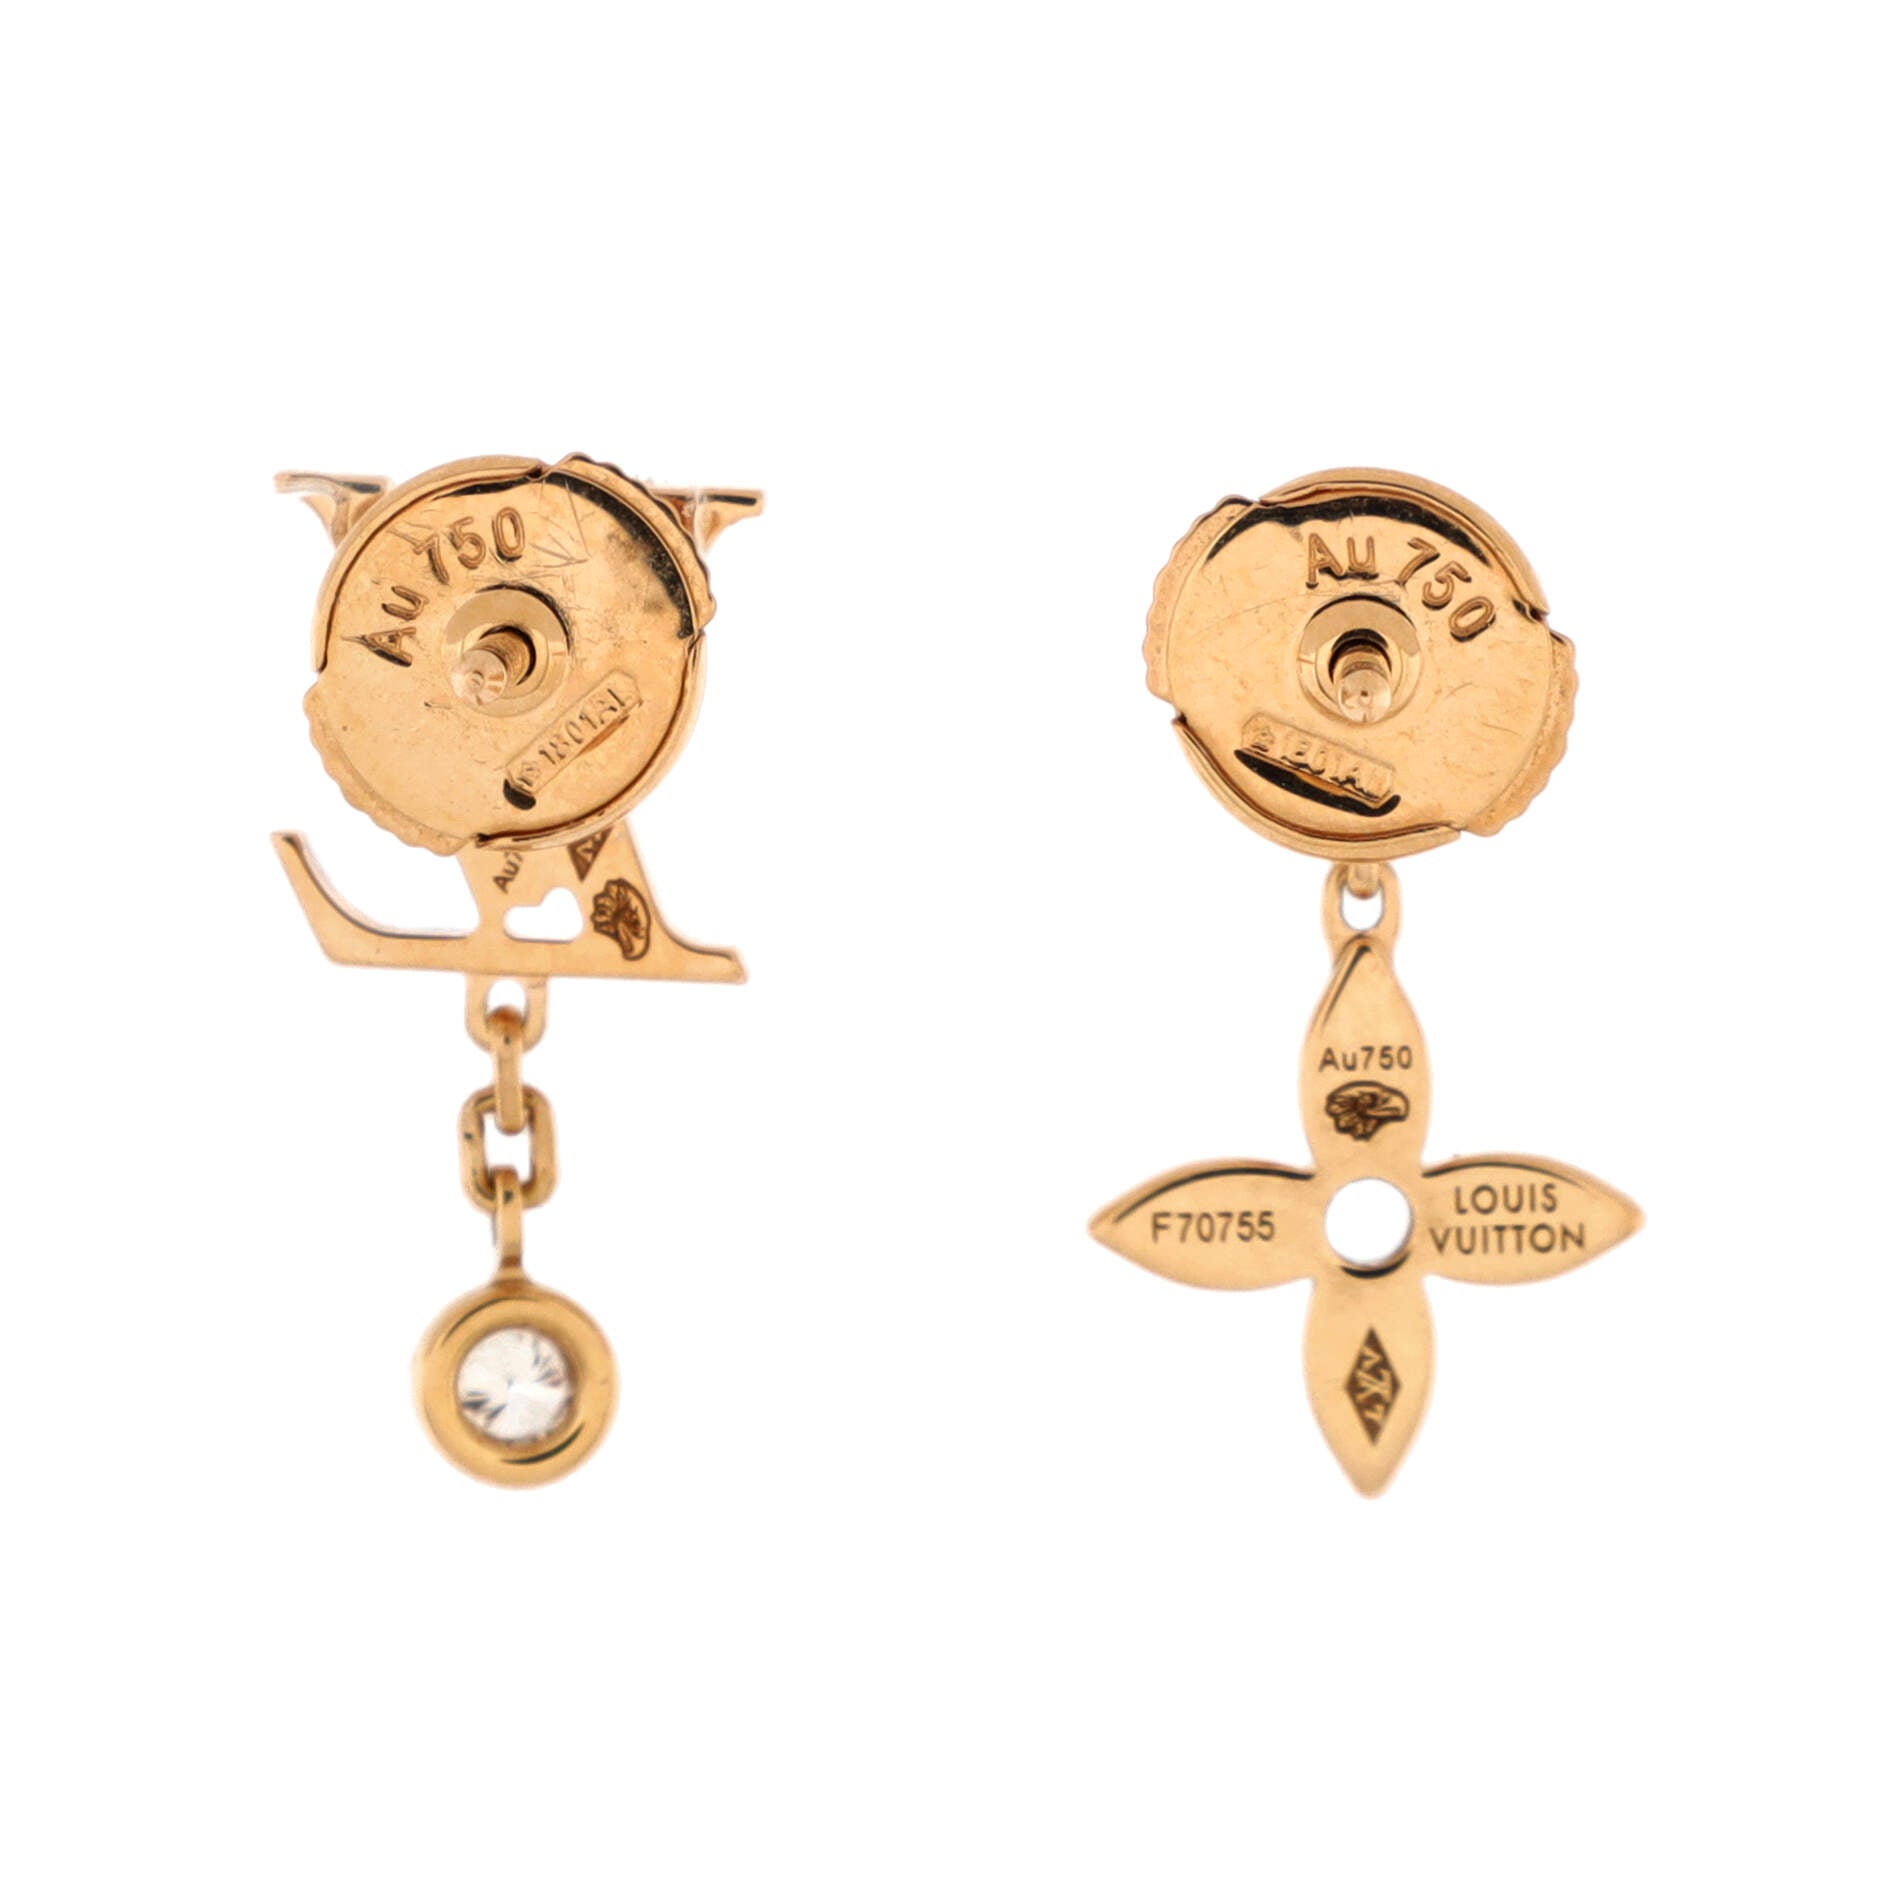 Shop Louis Vuitton MONOGRAM Idylle blossom ear stud, pink gold and